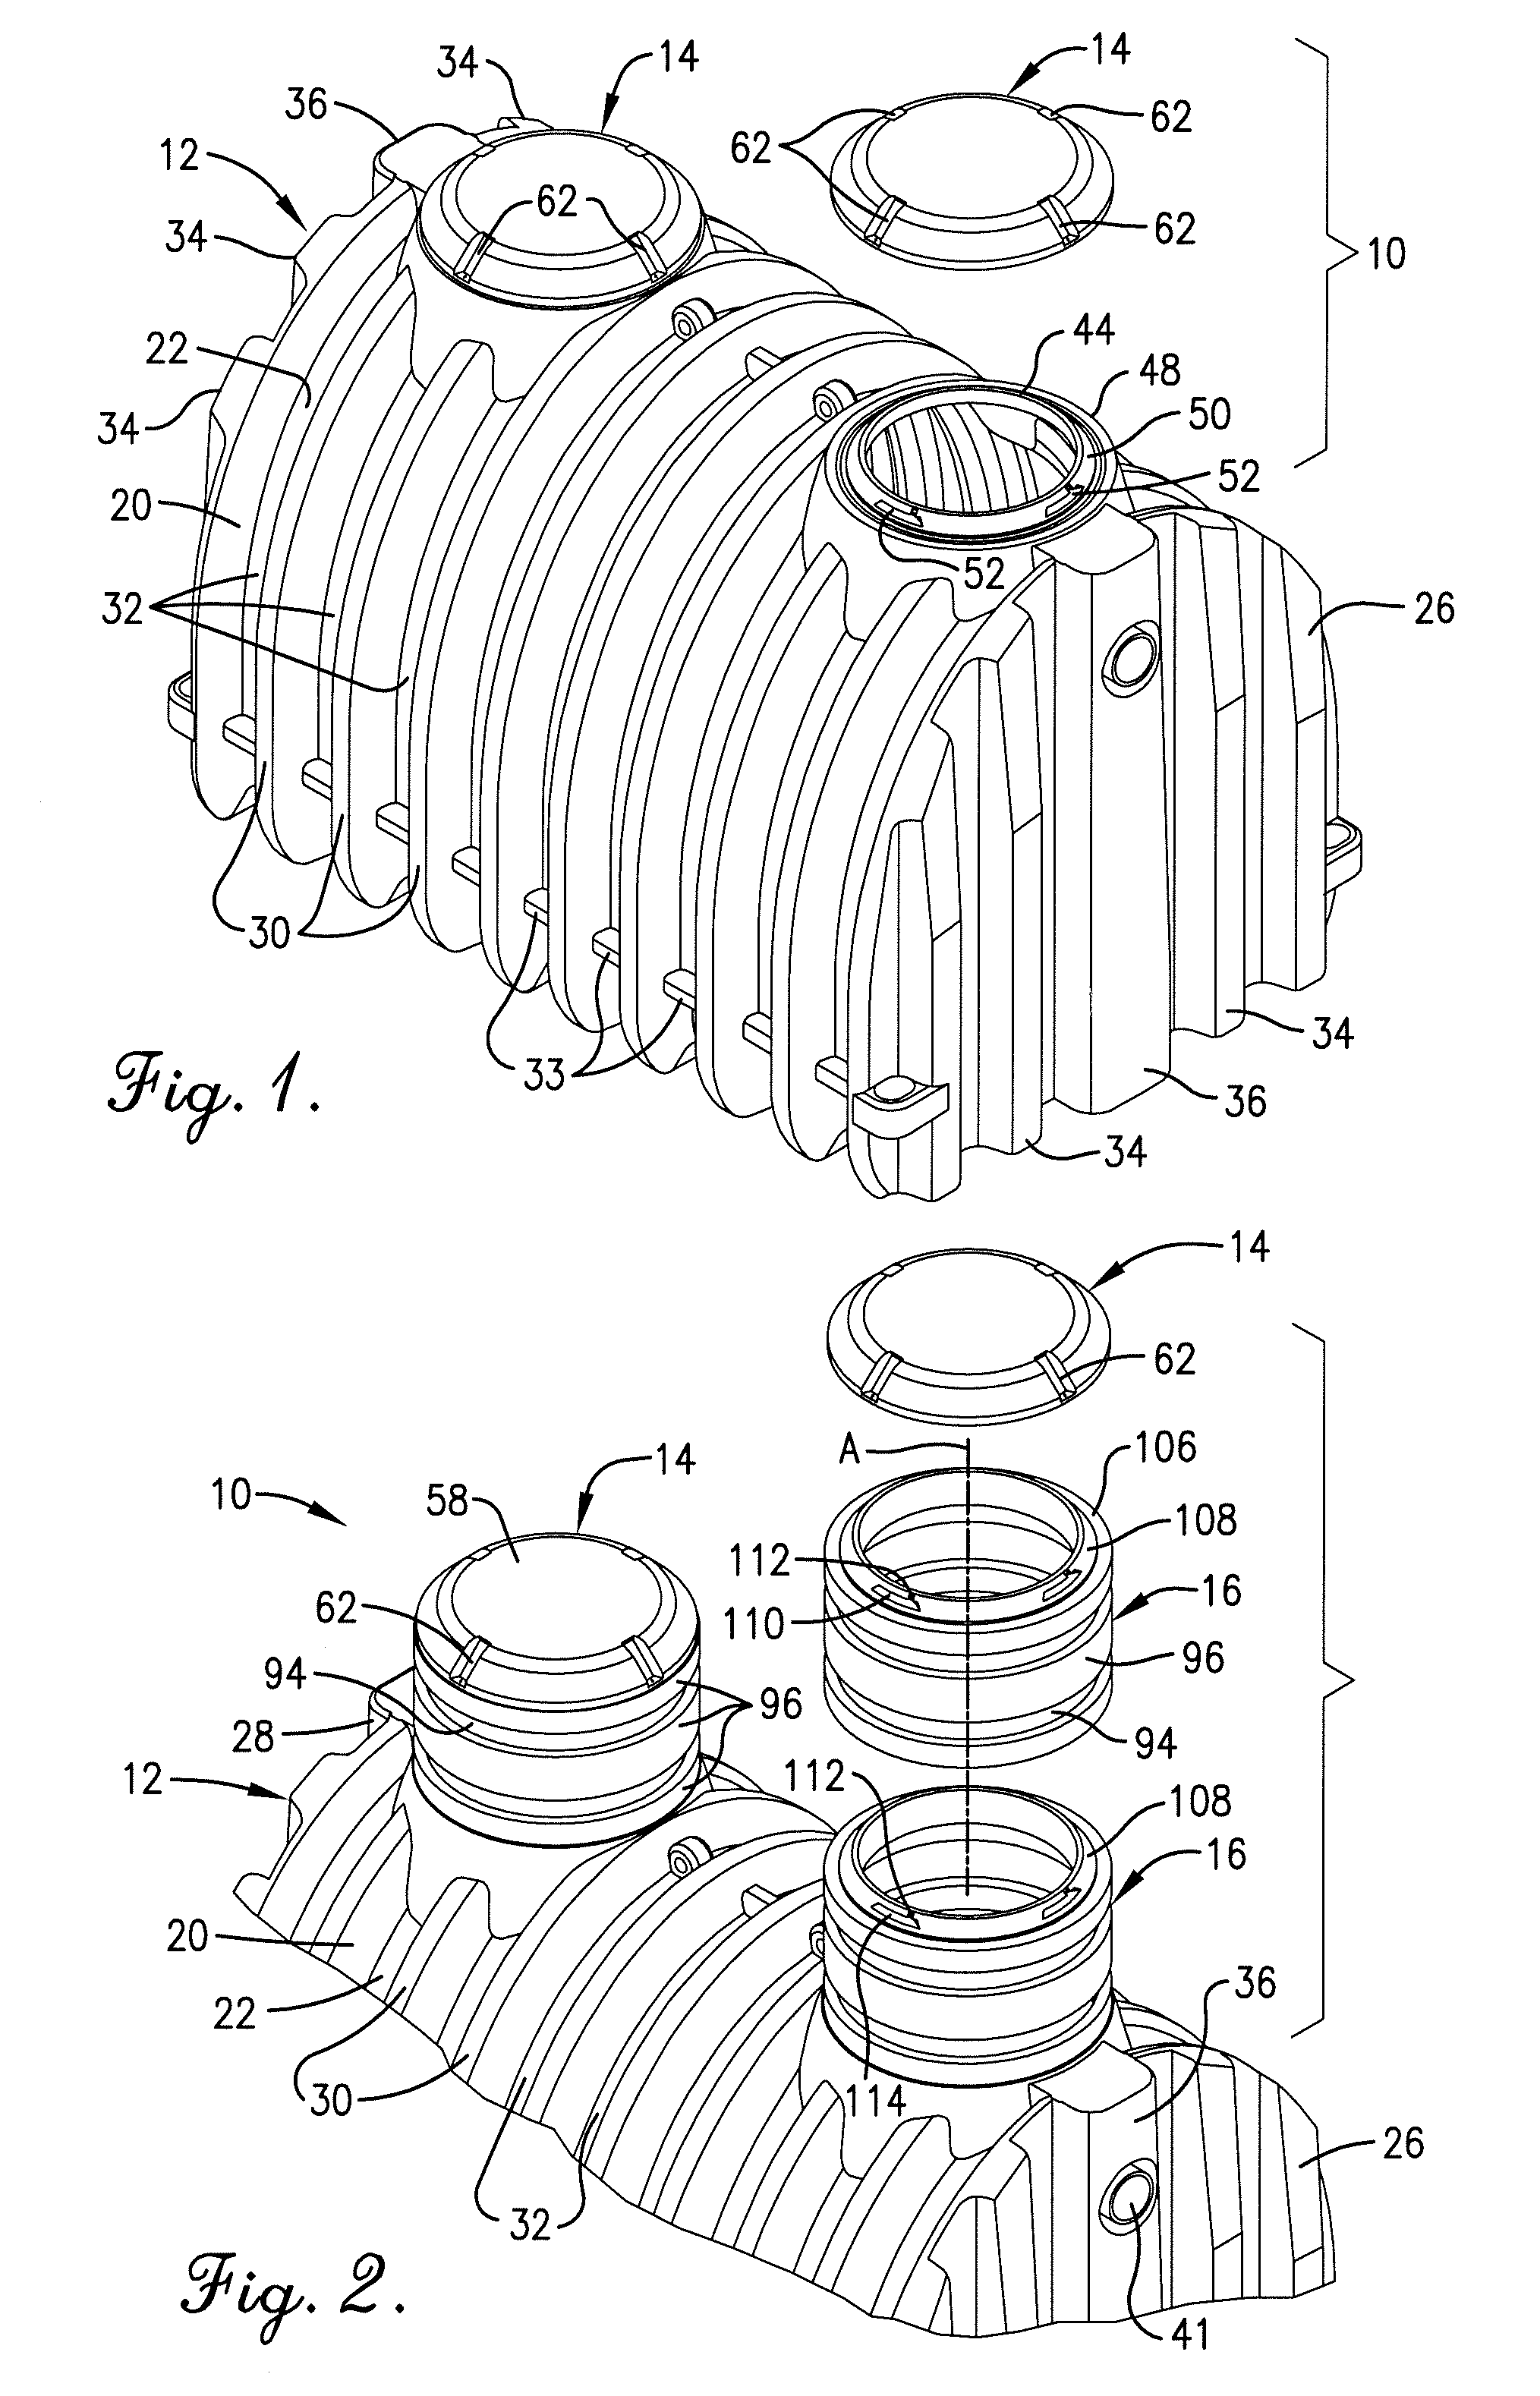 Rotationally molded subterranean tank with riser